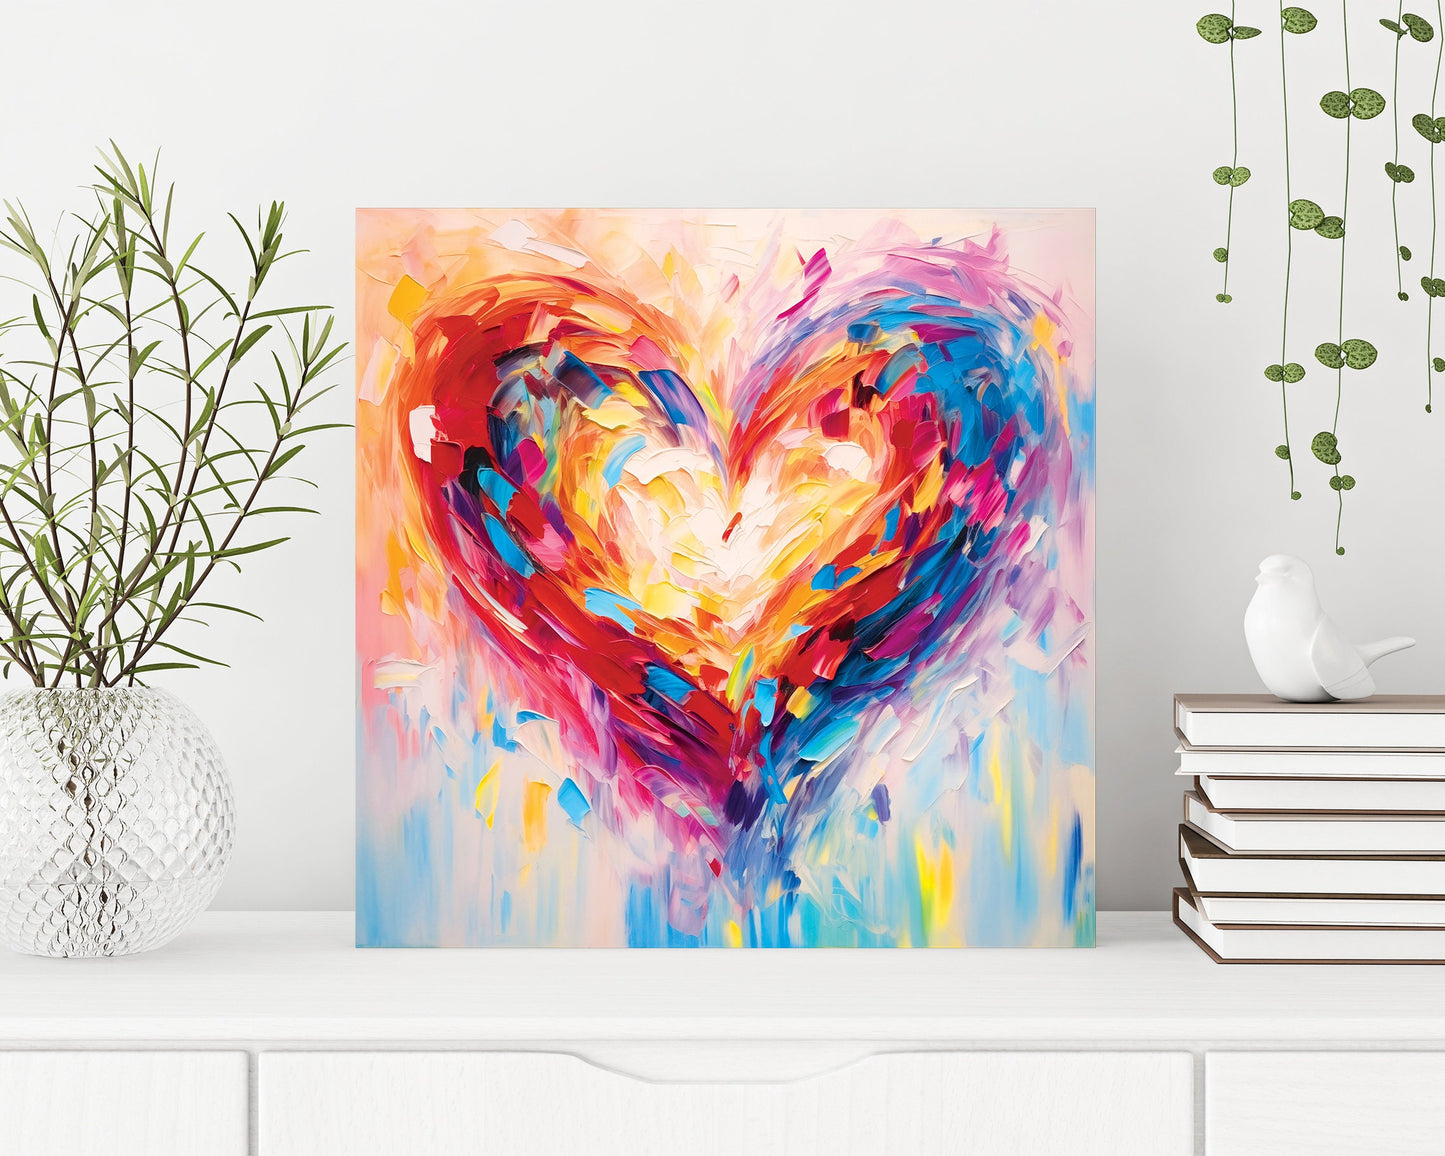 12in Oil Painting Style of a Colorful Heart Valentine__ Day Canvas UV Print Wall Art, Wall Canvas Printing, Living Room Decor | Mantle